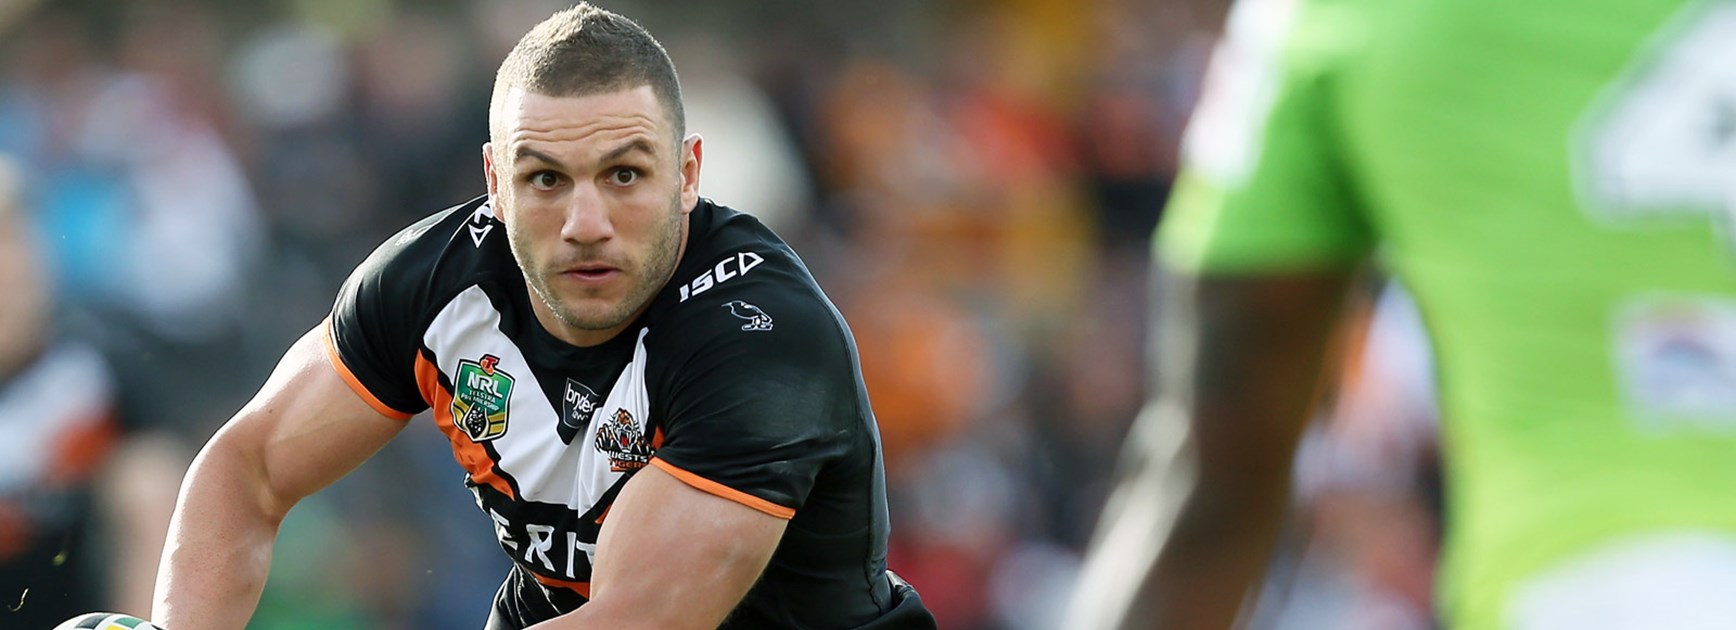 Robbie Farah has been confirmed as Wests Tigers' starting hooker for 2016.